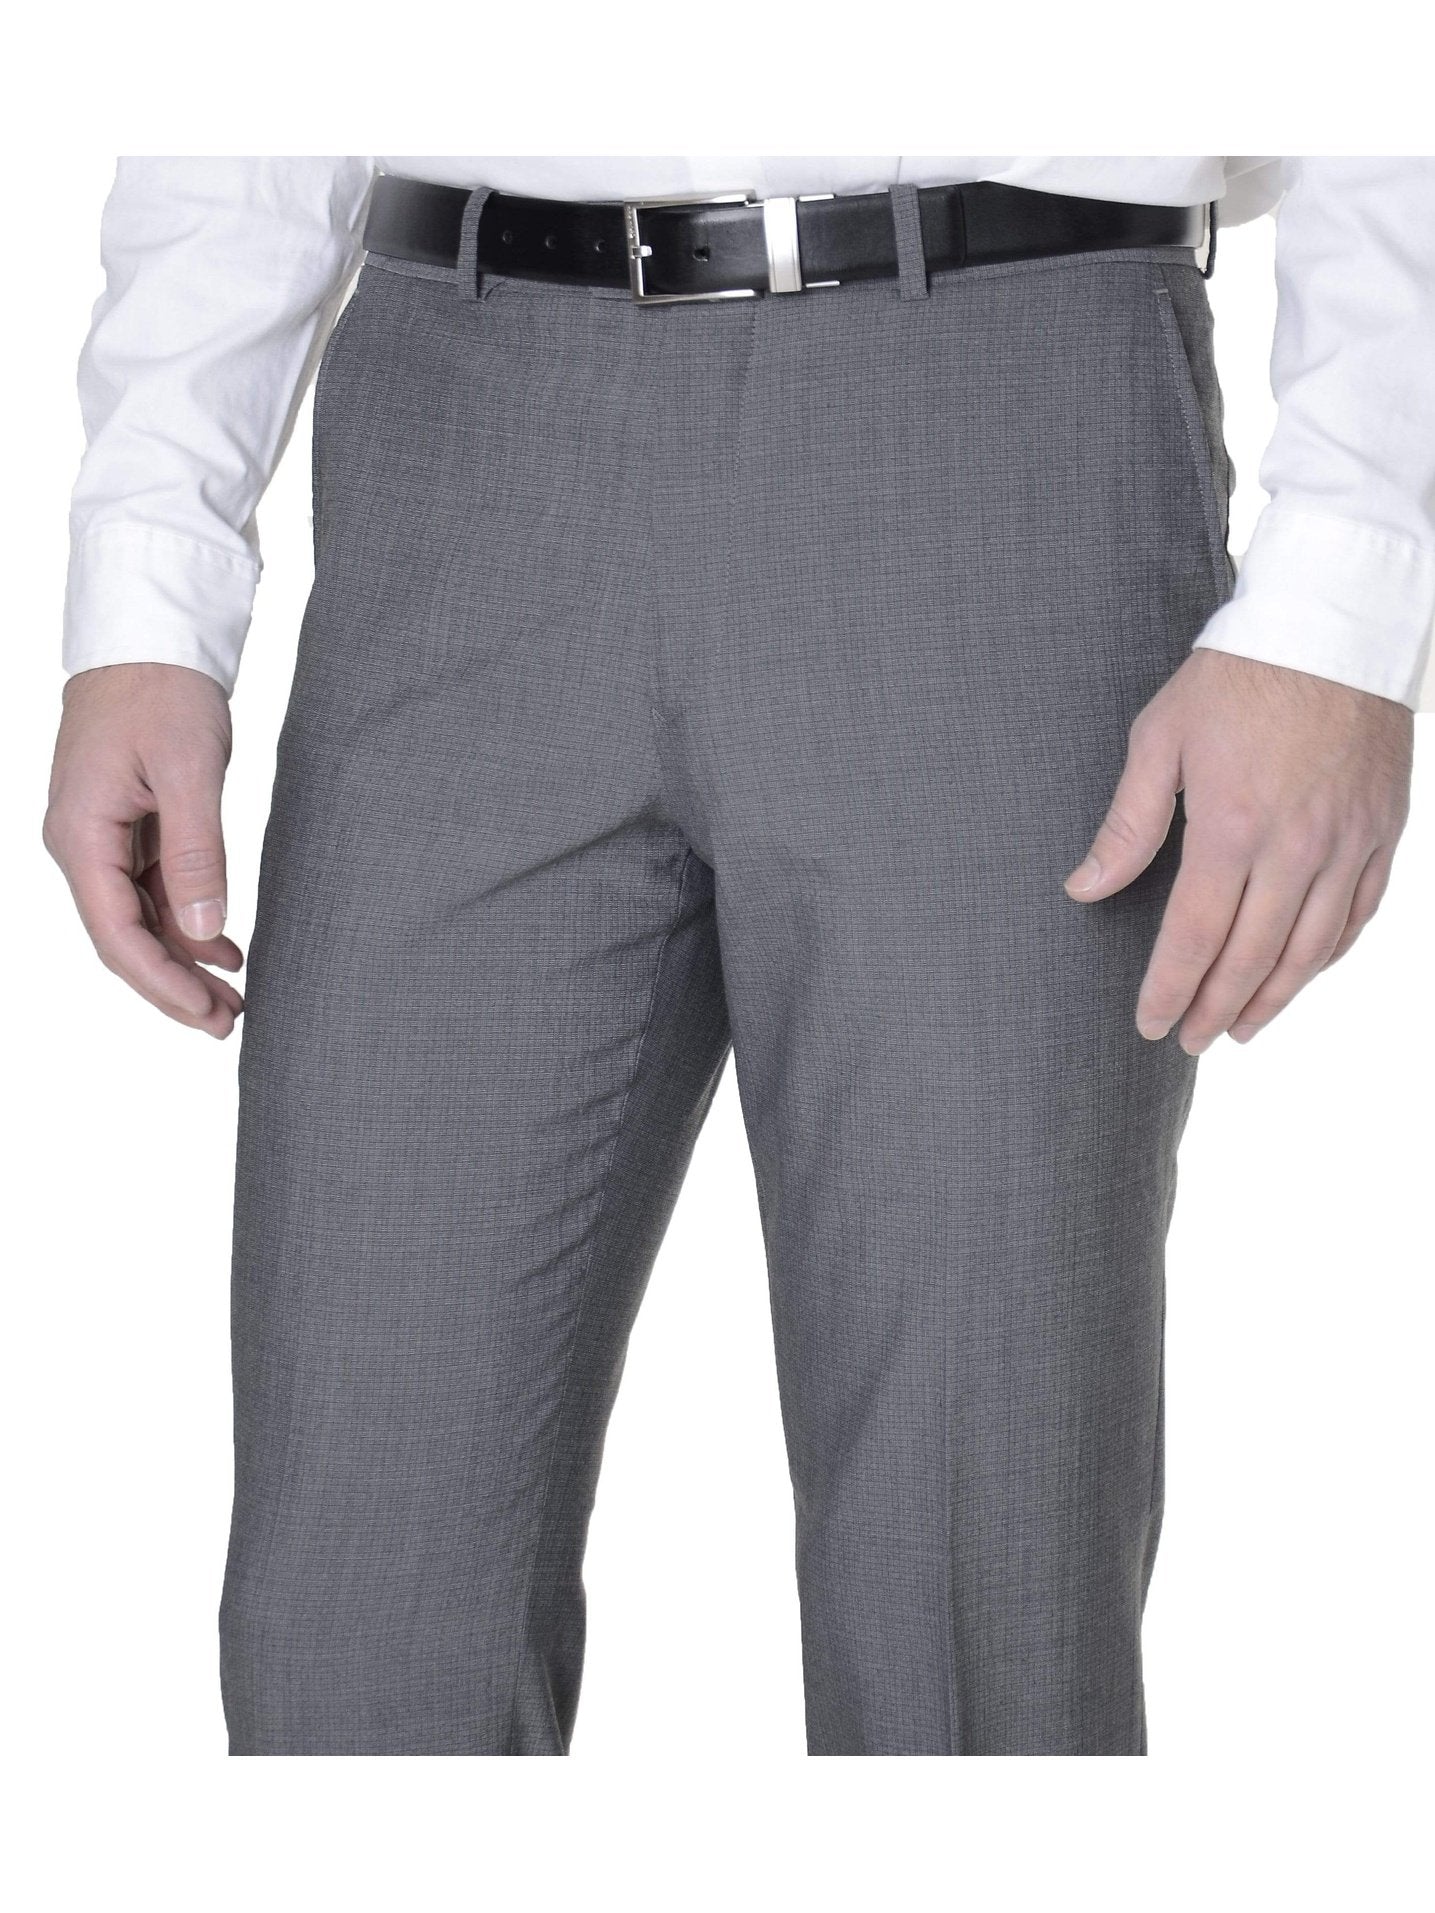 JNGSA Men's Pleated Cuffed Suit Pants Comfort Stretch Slim Straight Trousers  Business Casual Suit Trouser for Daily Holiday Formal Gray M Clearance -  Walmart.com